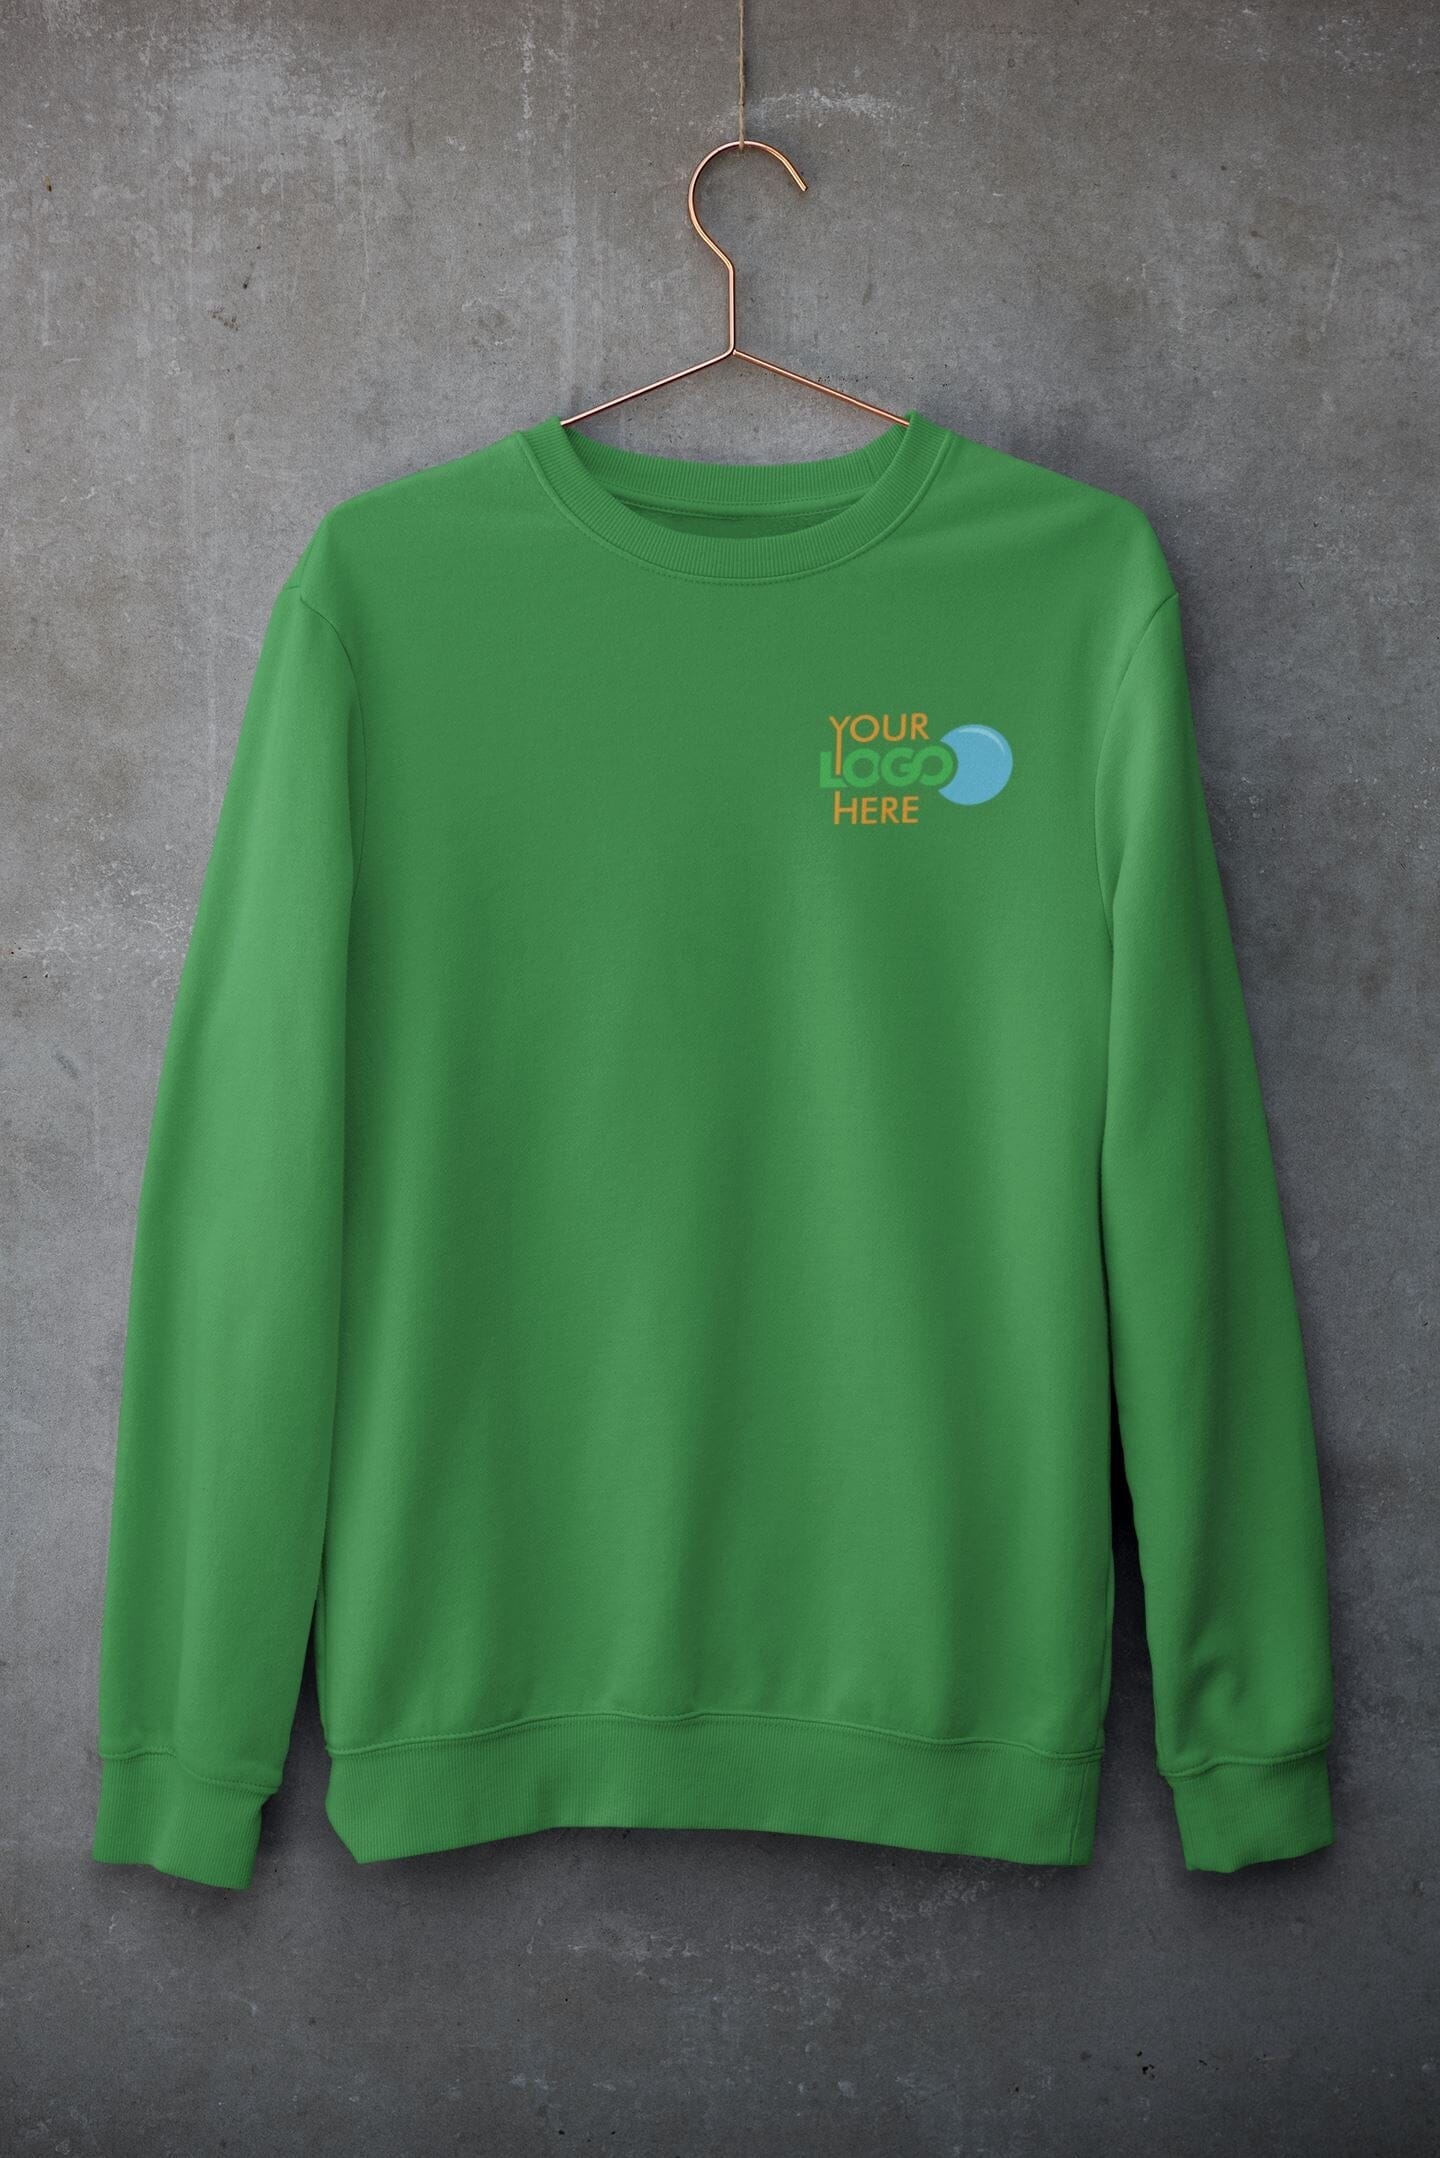 Personalised Sweatshirts with Your Logo on Front & Back